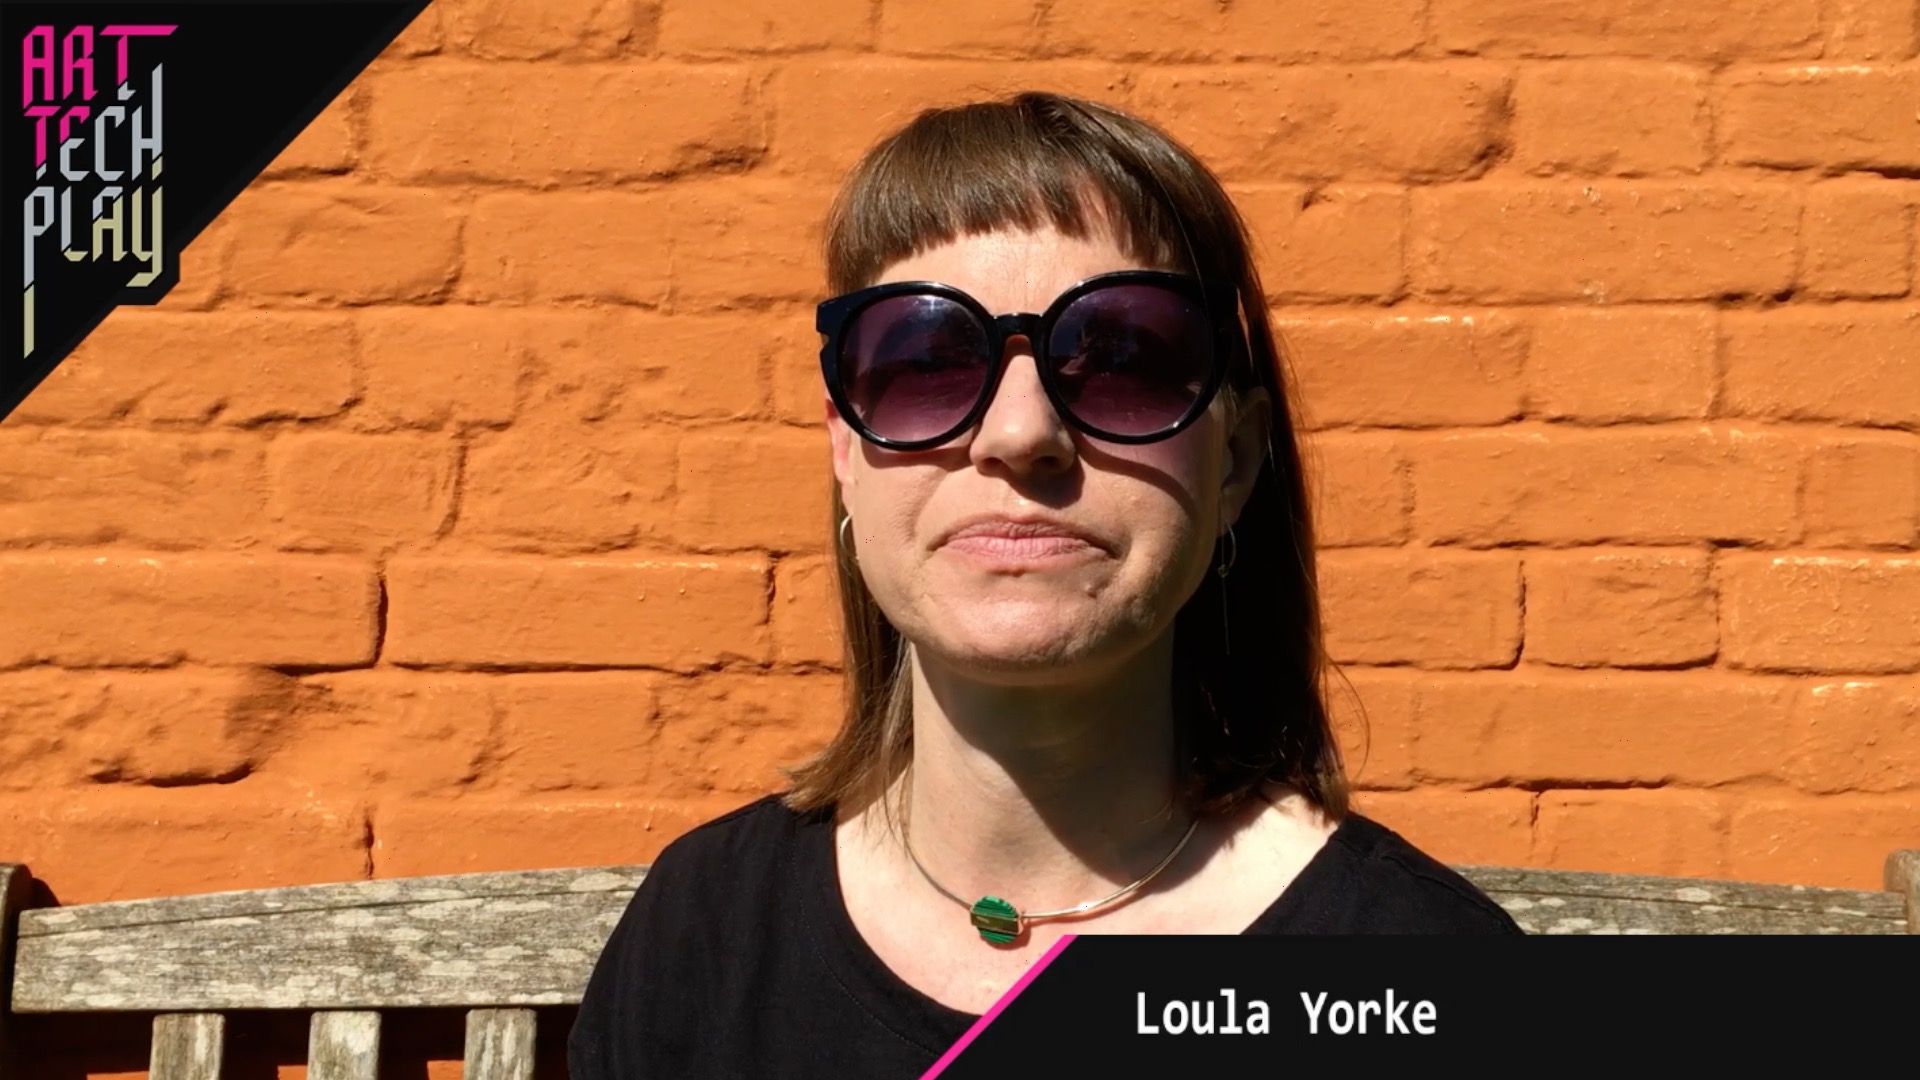 Loula Yorke on performing with hardware synths